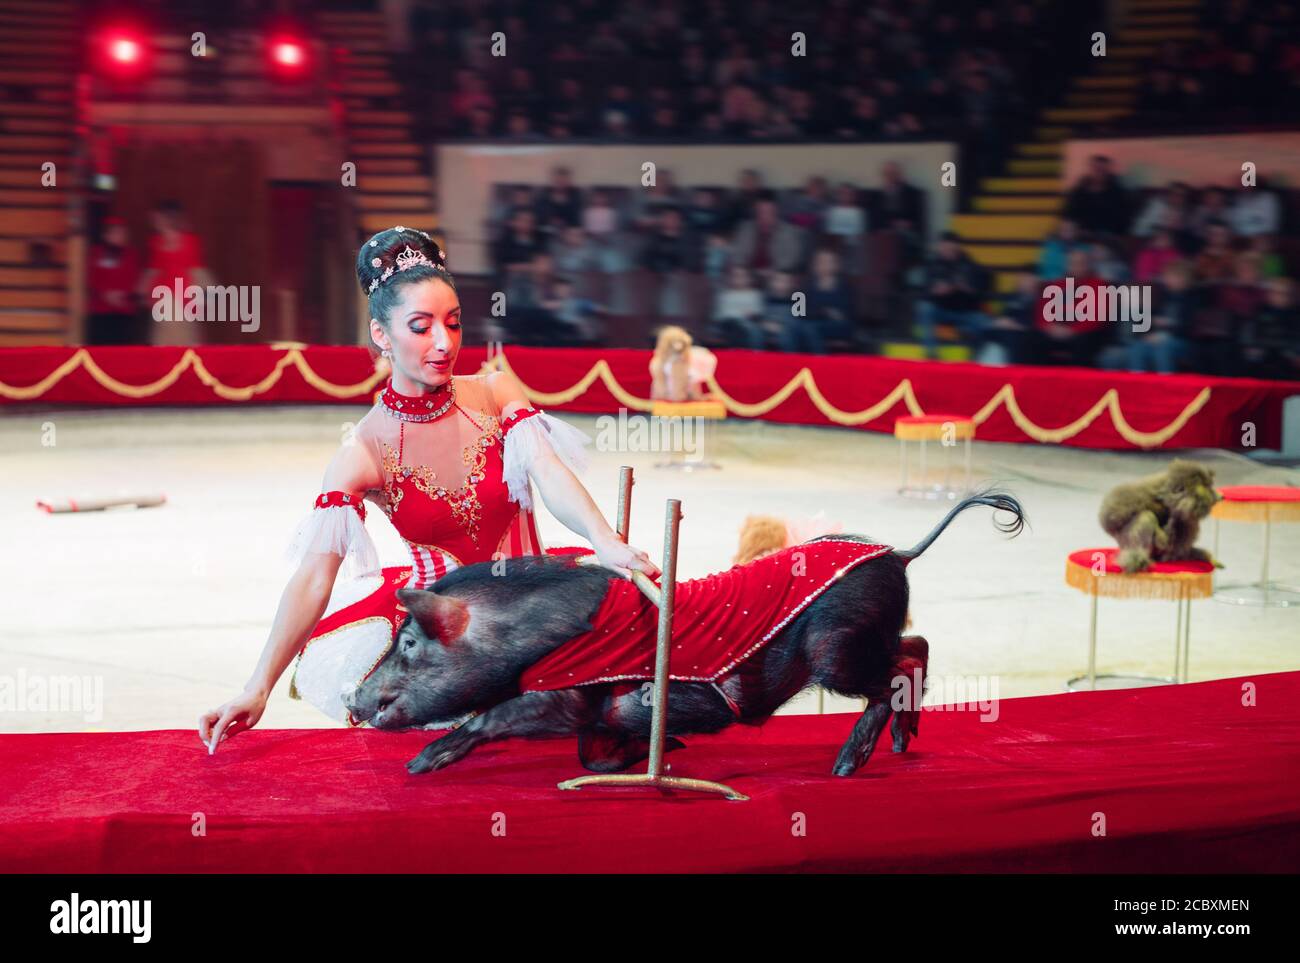 Dogs Performance in the Circus. Circus performance Stock Photo